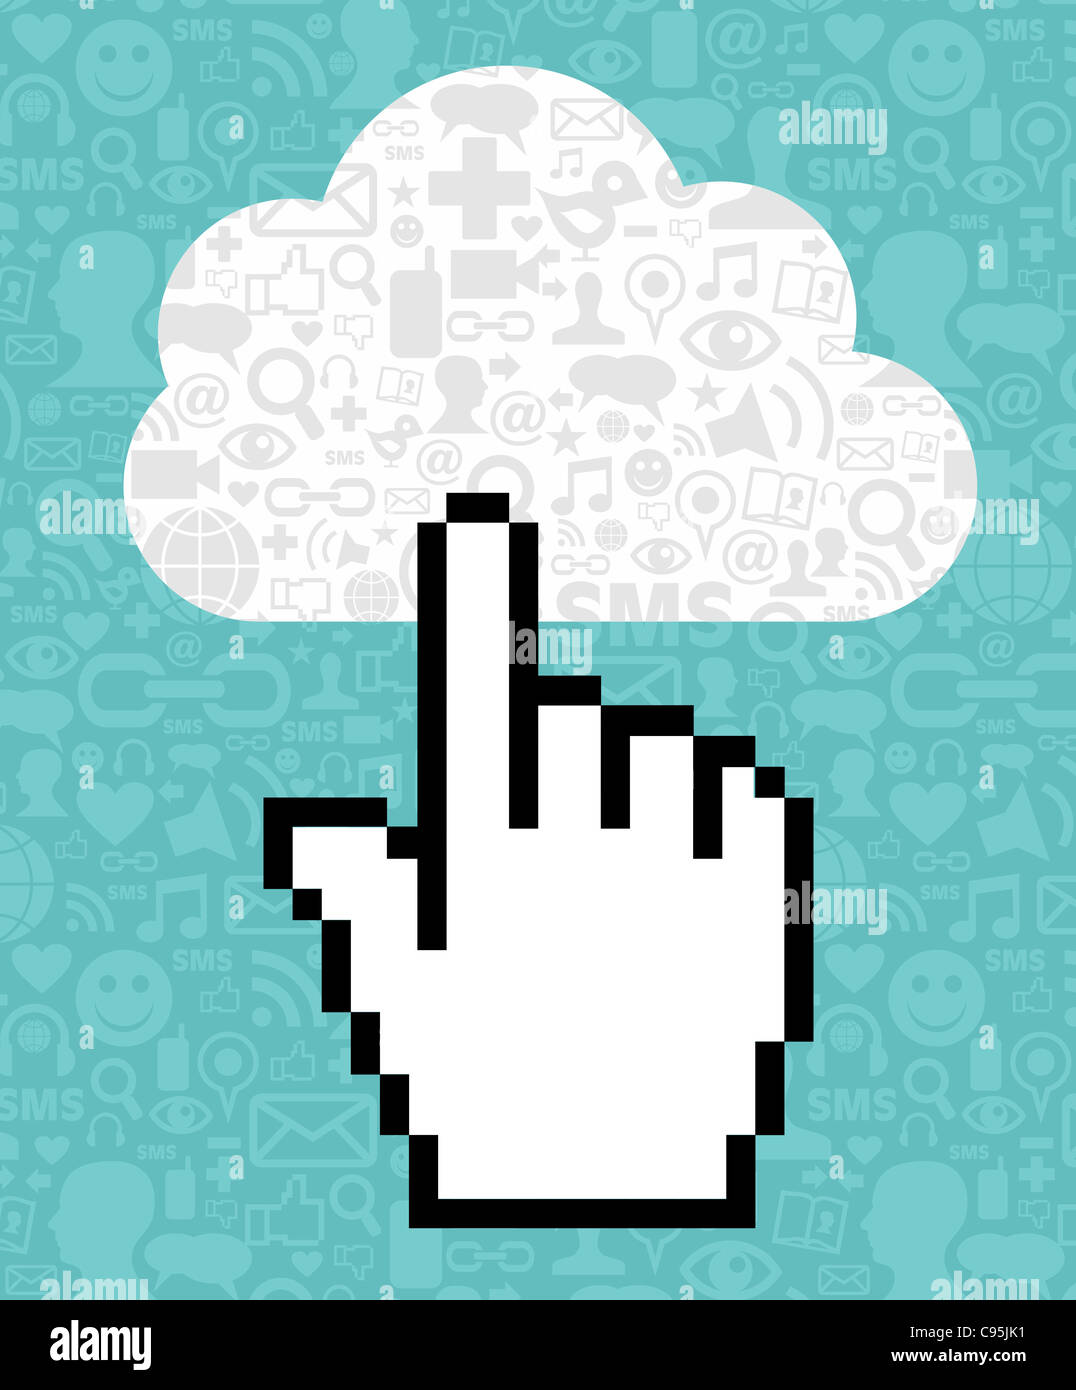 Cursor icon hand clicking on a cloud with icons of social media on blue background. Vector file available. Stock Photo